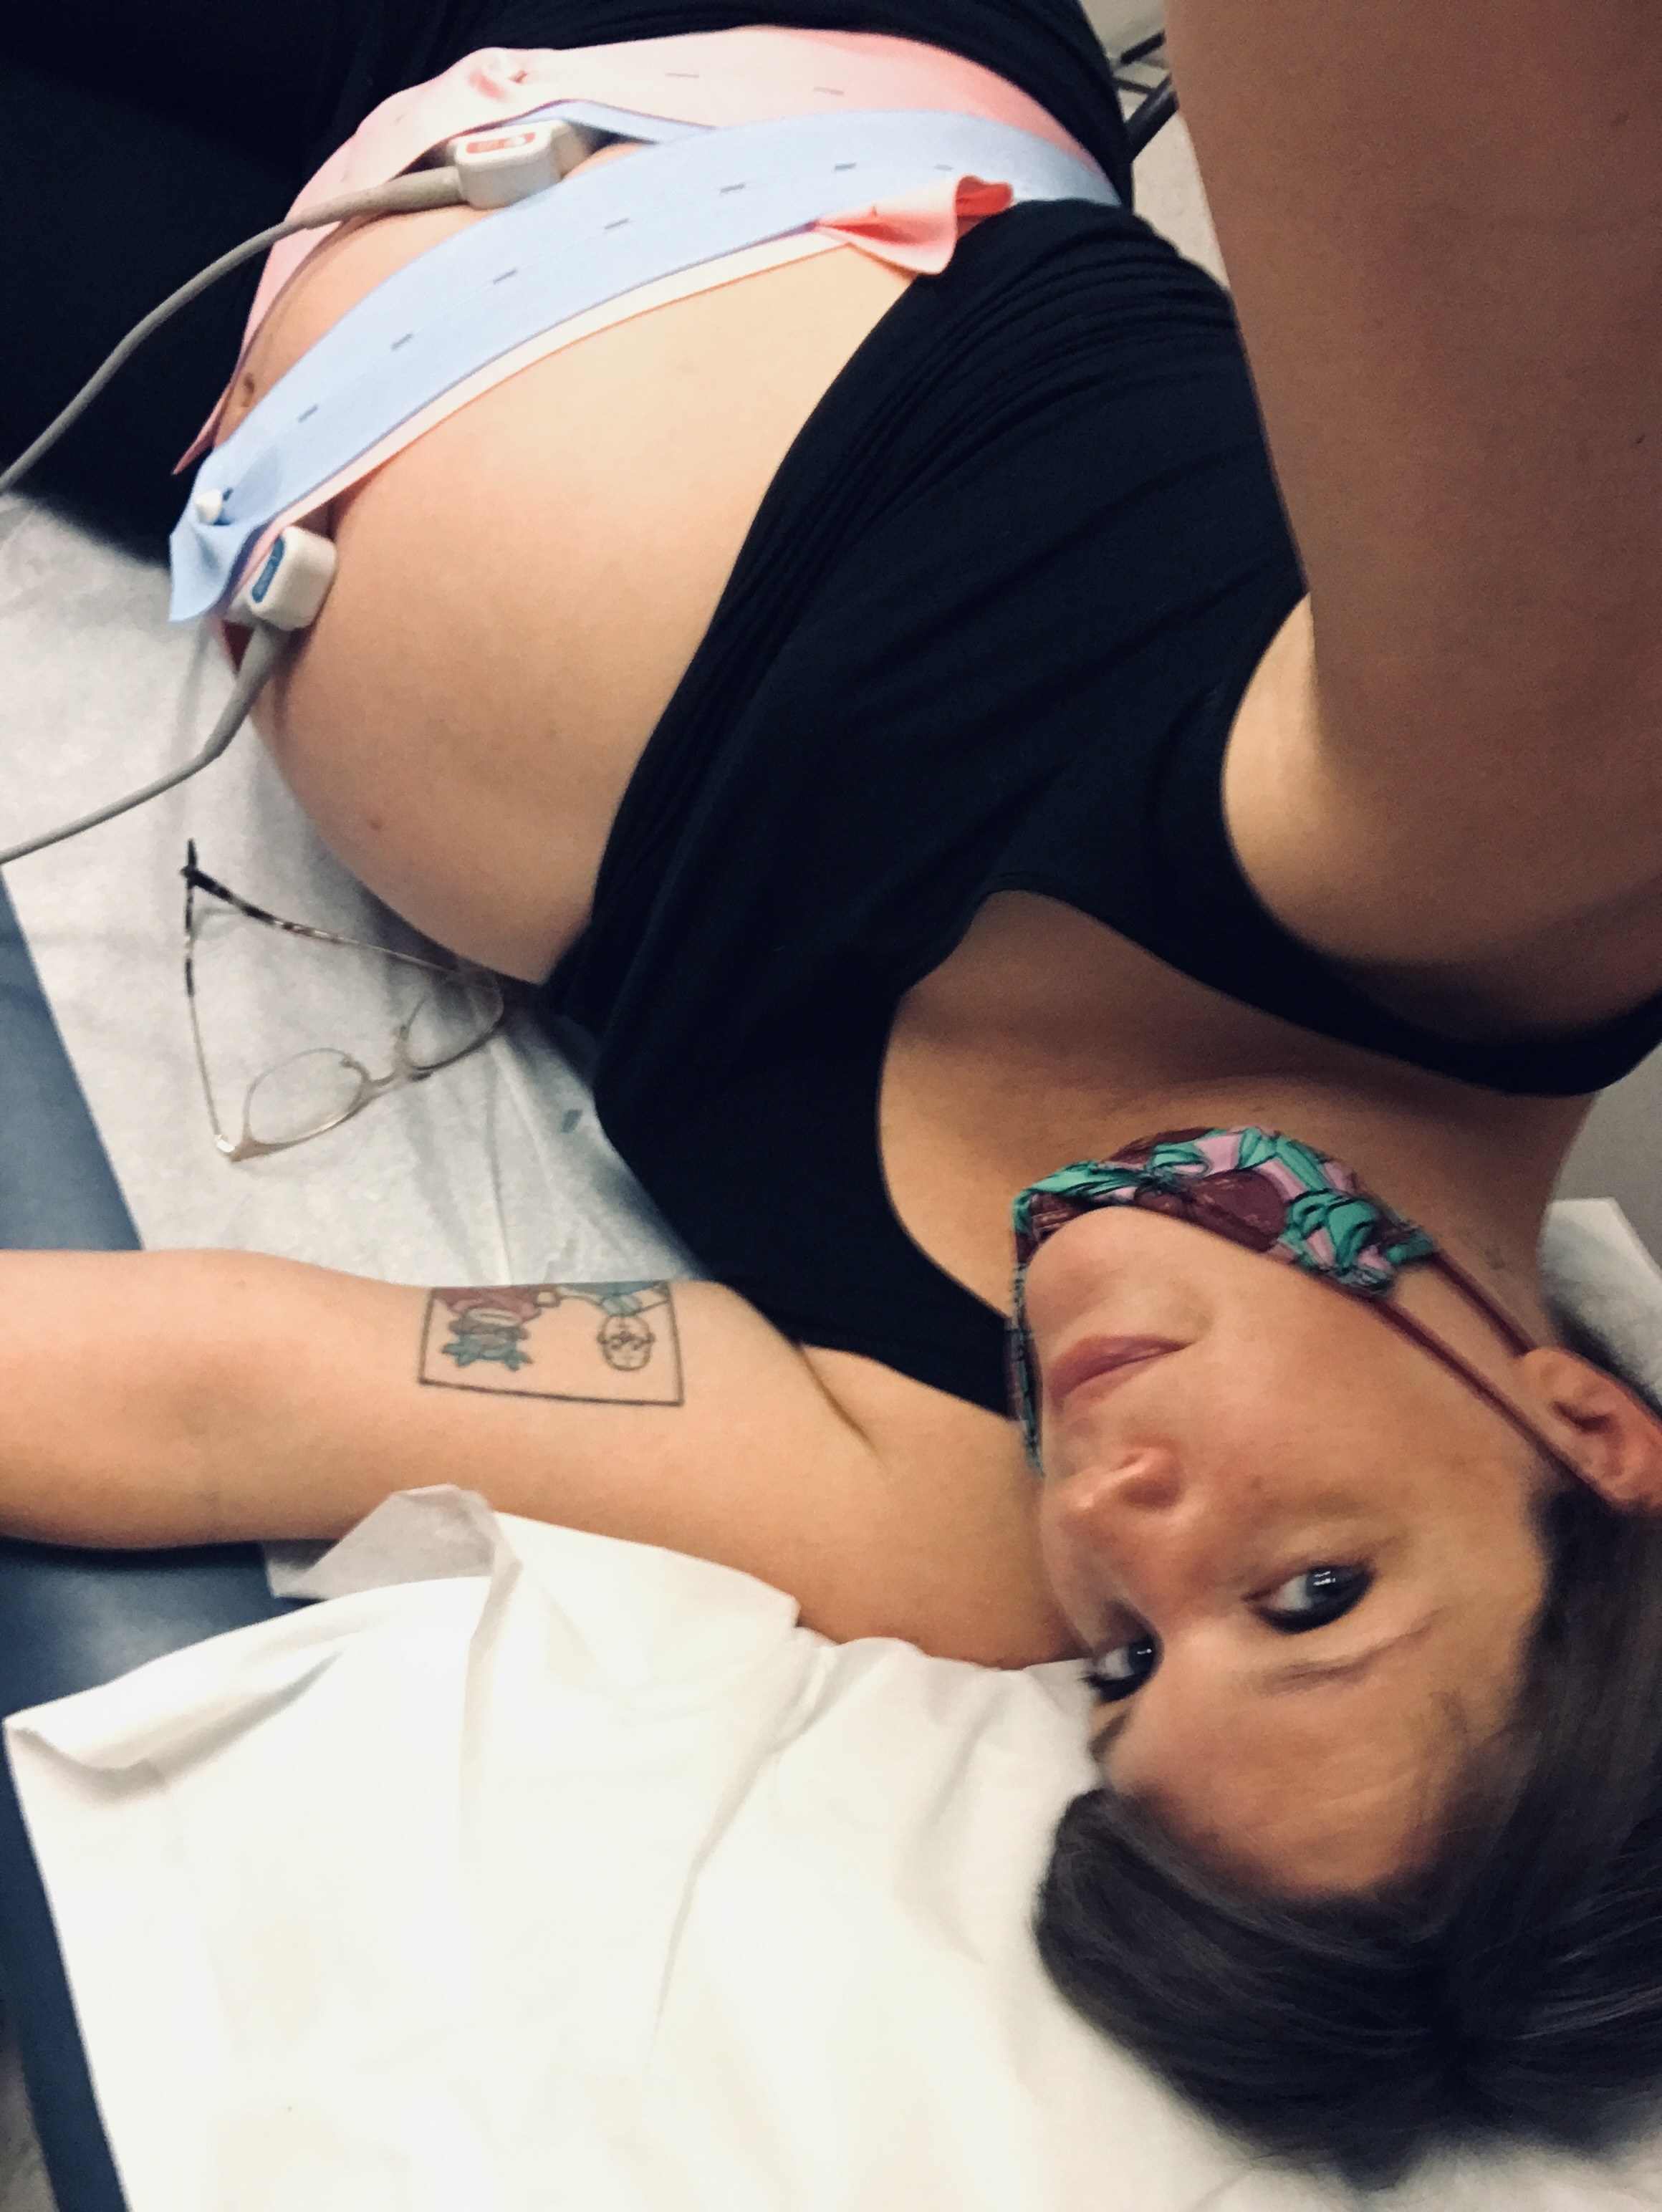 Sophie laying on an exam table at the doctors office with a heart rate monitor strapped around her pregnant belly.